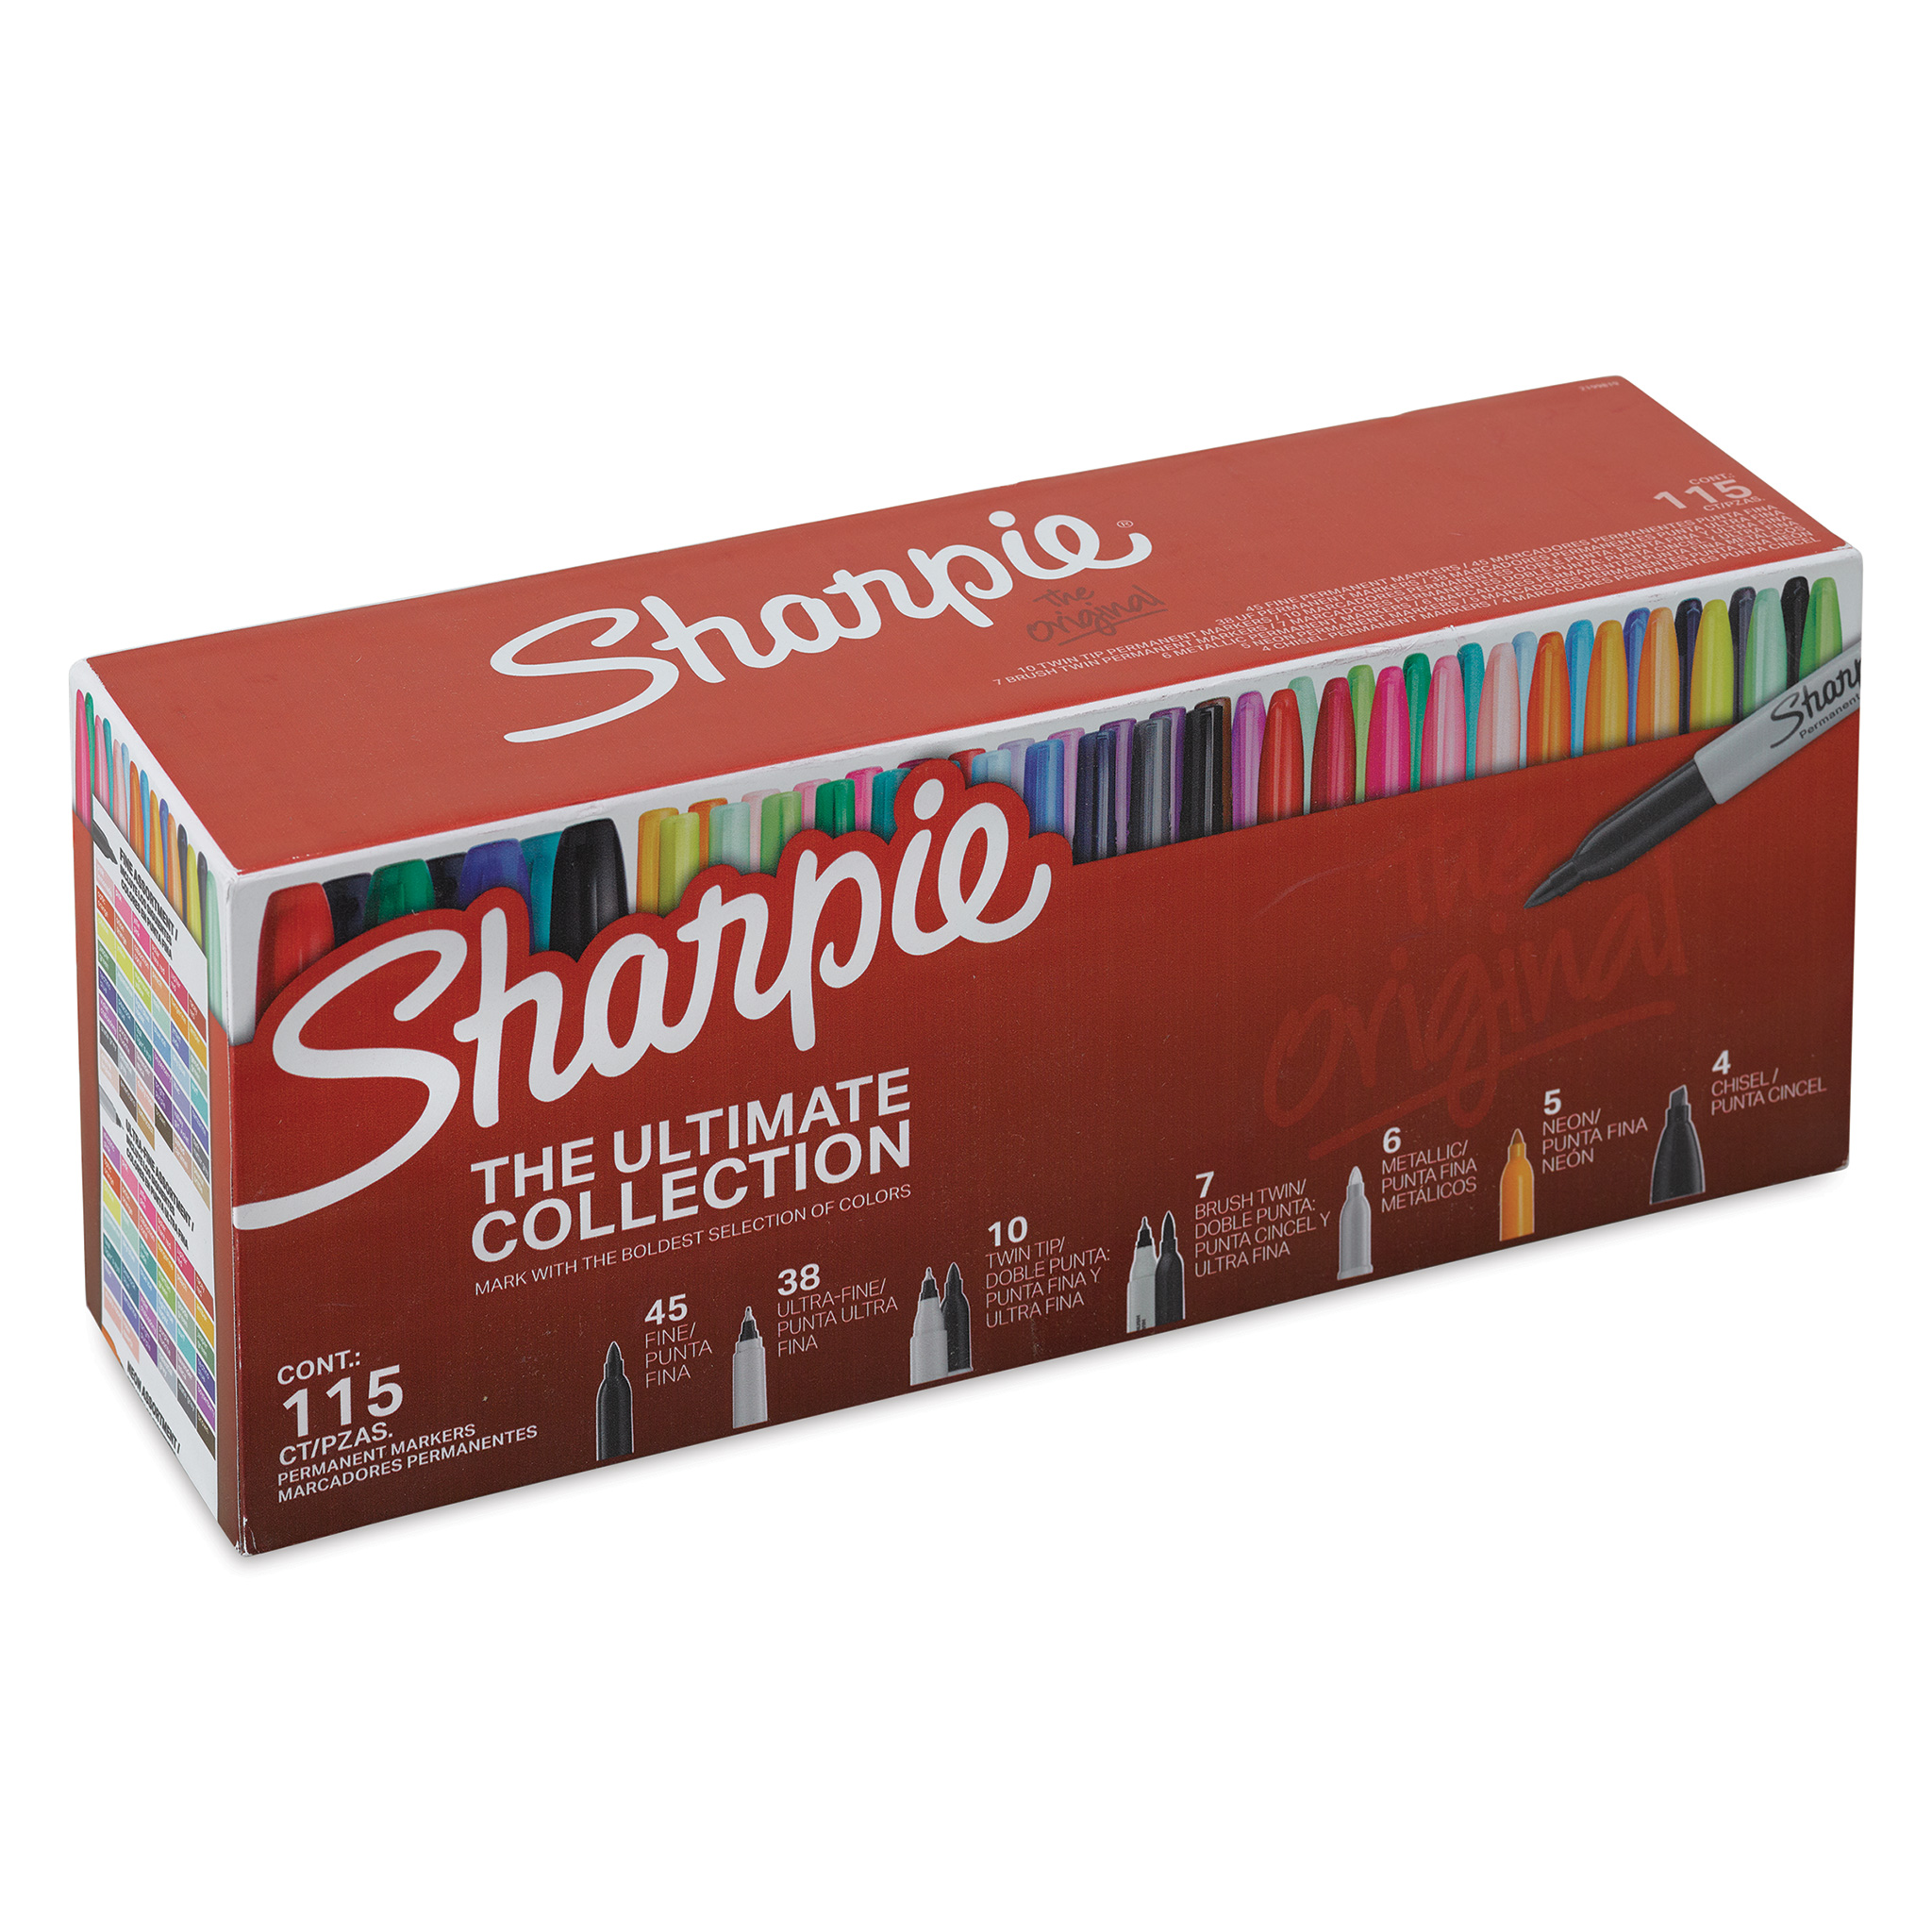 Sharpie Permanent Markers Variety Pack